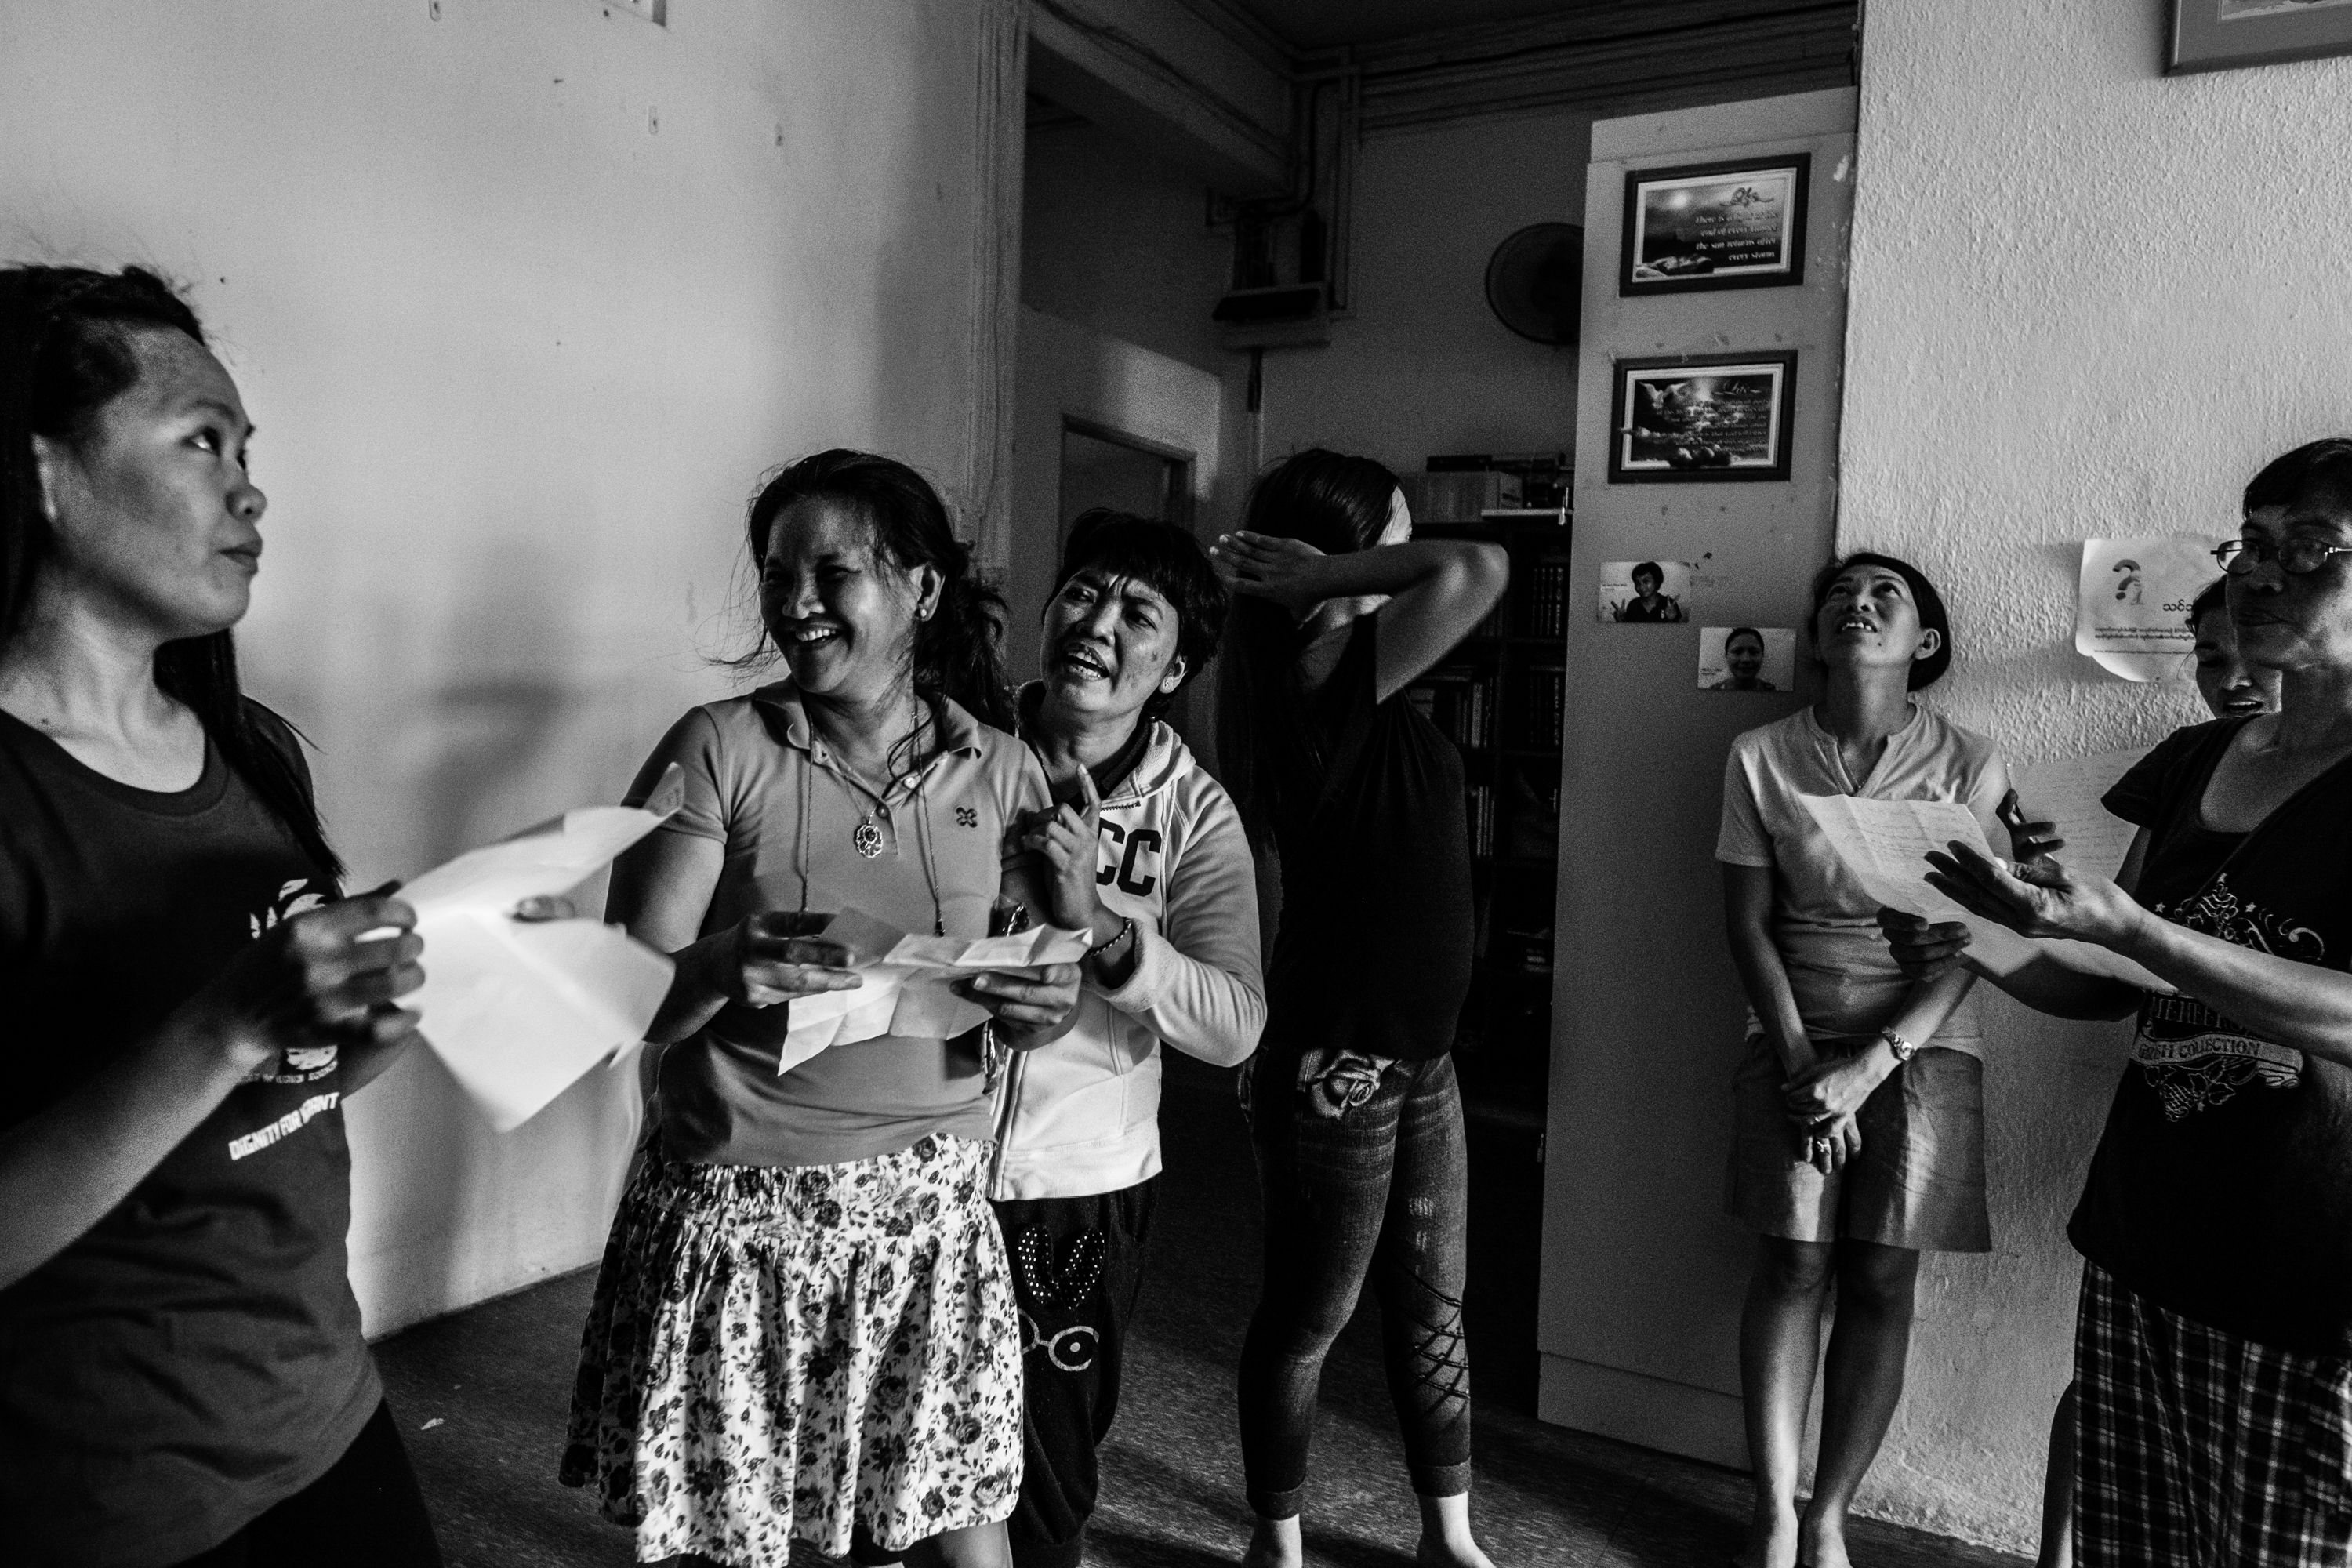 Runaway migrant workers practiced a song inside the shelter to stay active despite their painful situations.Image by Xyza Bacani. Singapore, 2016.